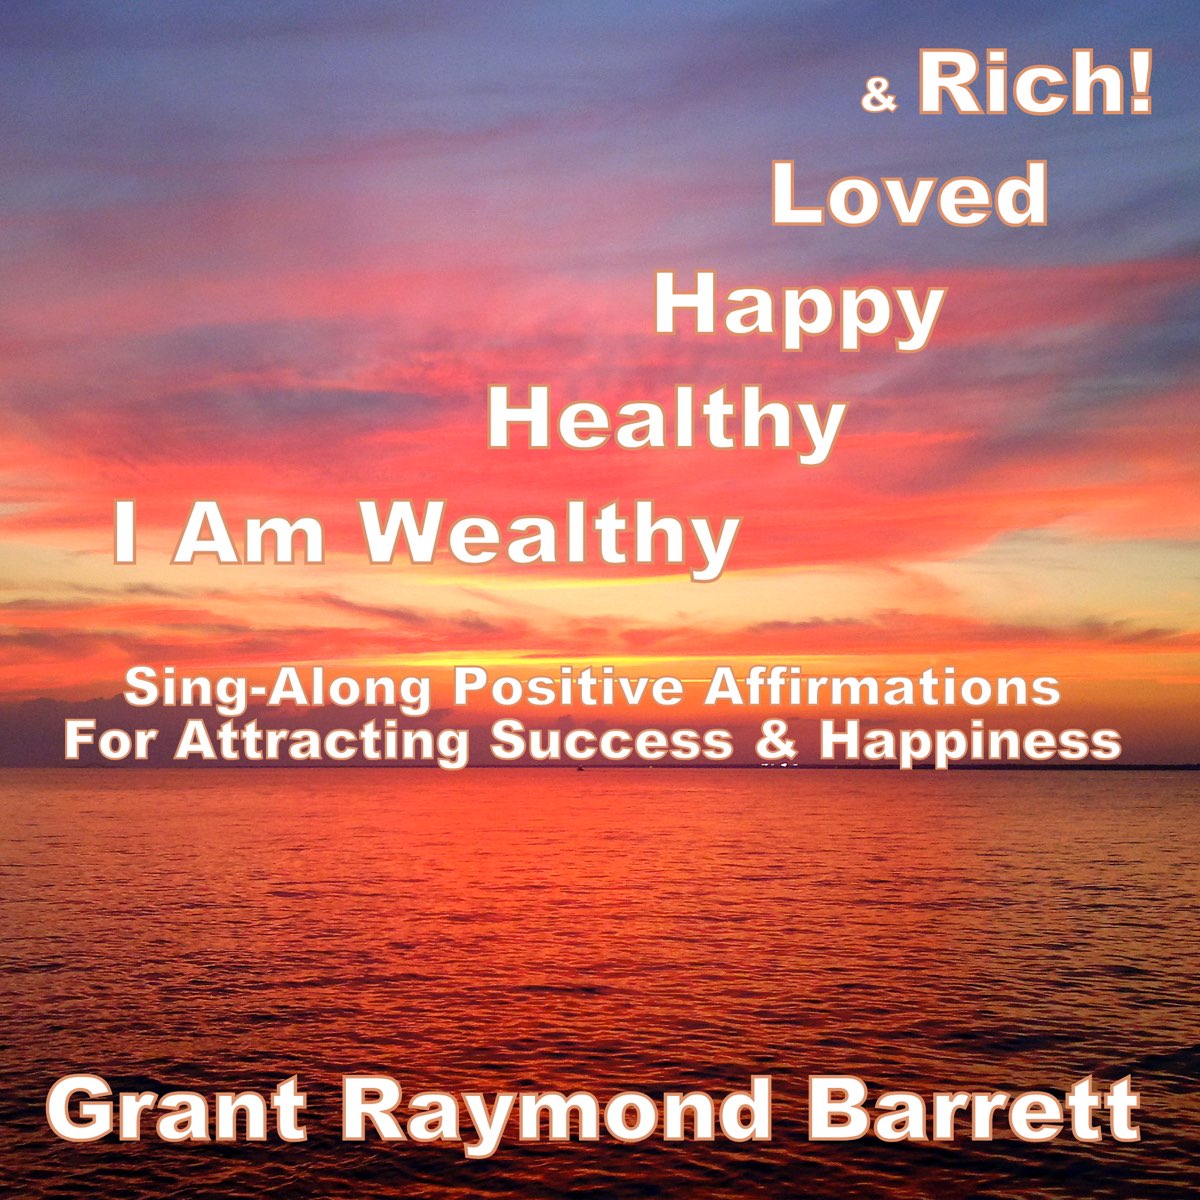 Be health and happy. Be healthy wealthy and Happy. Be Happy be healthy. Happiness Affirmation. I am healthy i am wealthy.